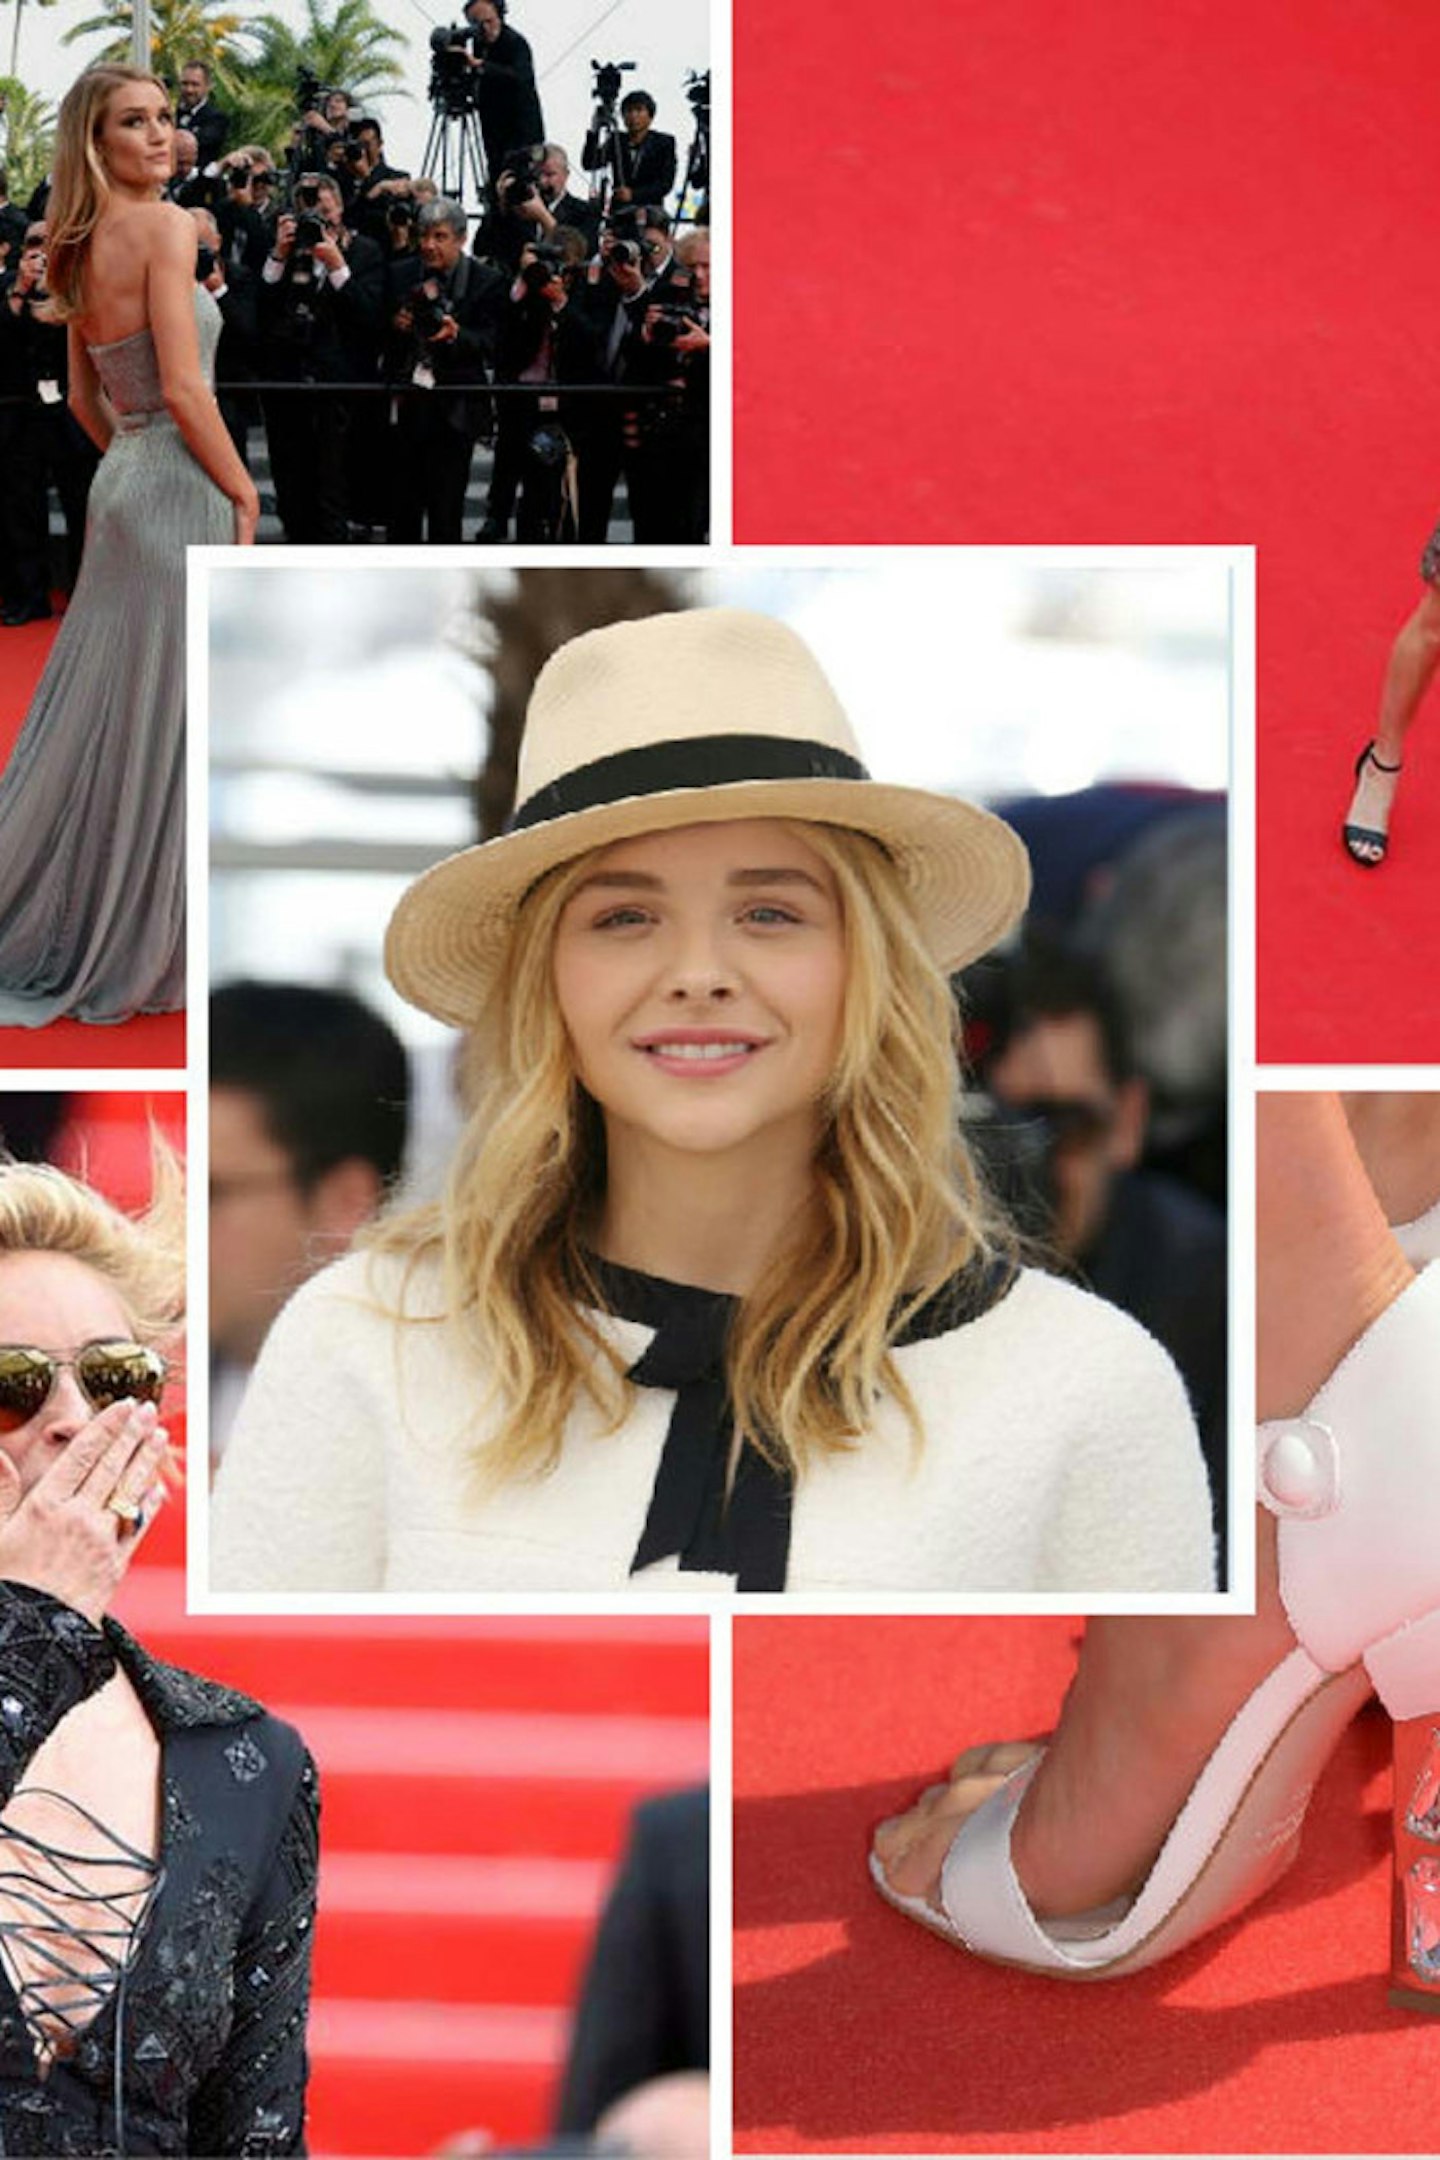 GALLERY >> Cannes Best Dressed